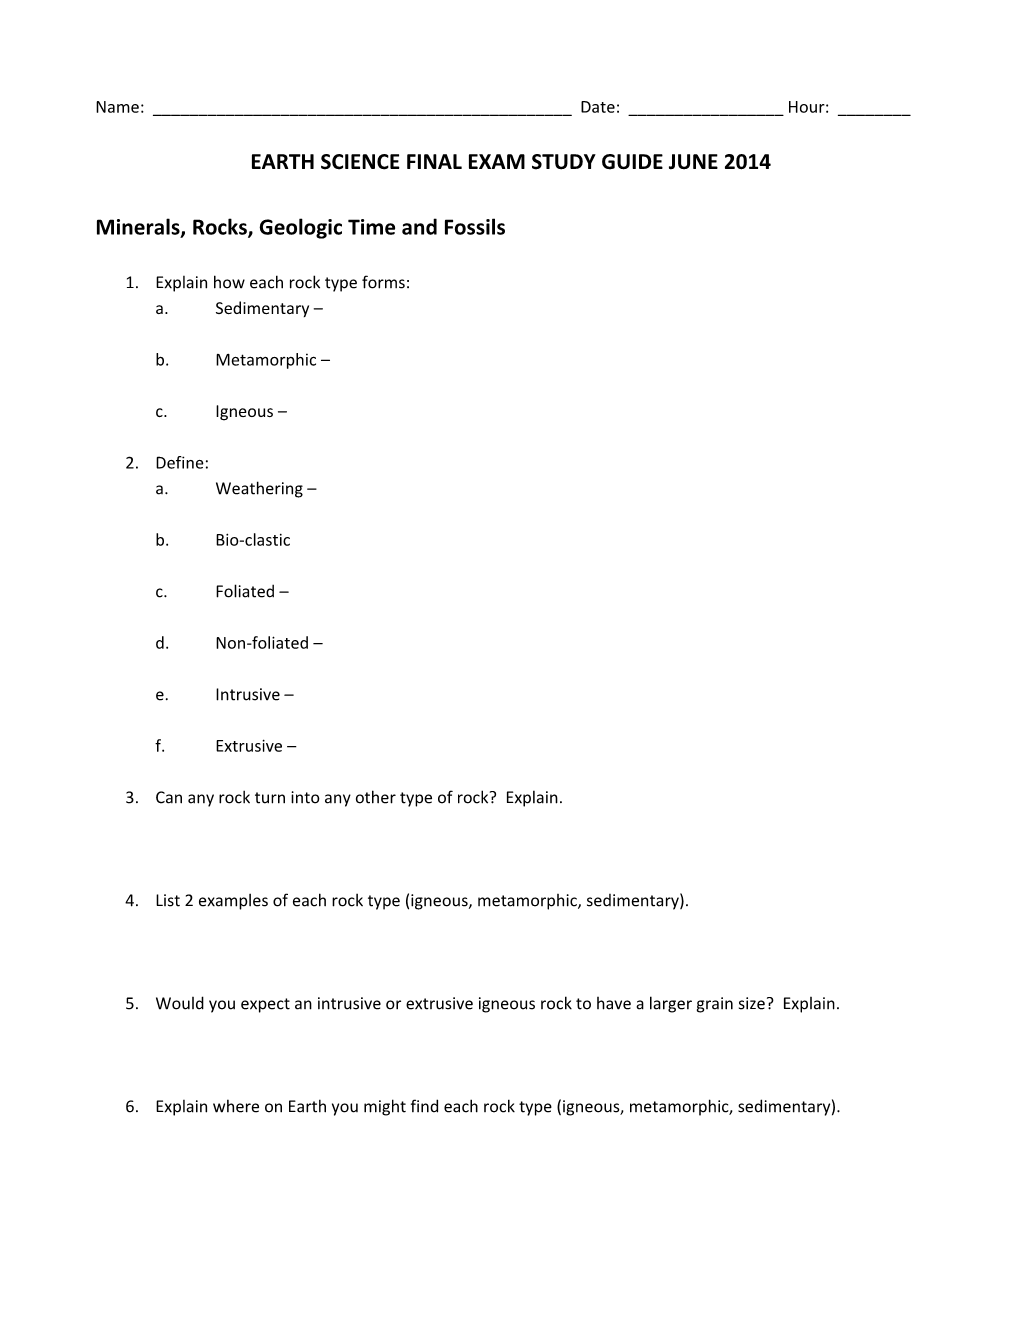 Earth Science Final Exam Study Guide June 2014